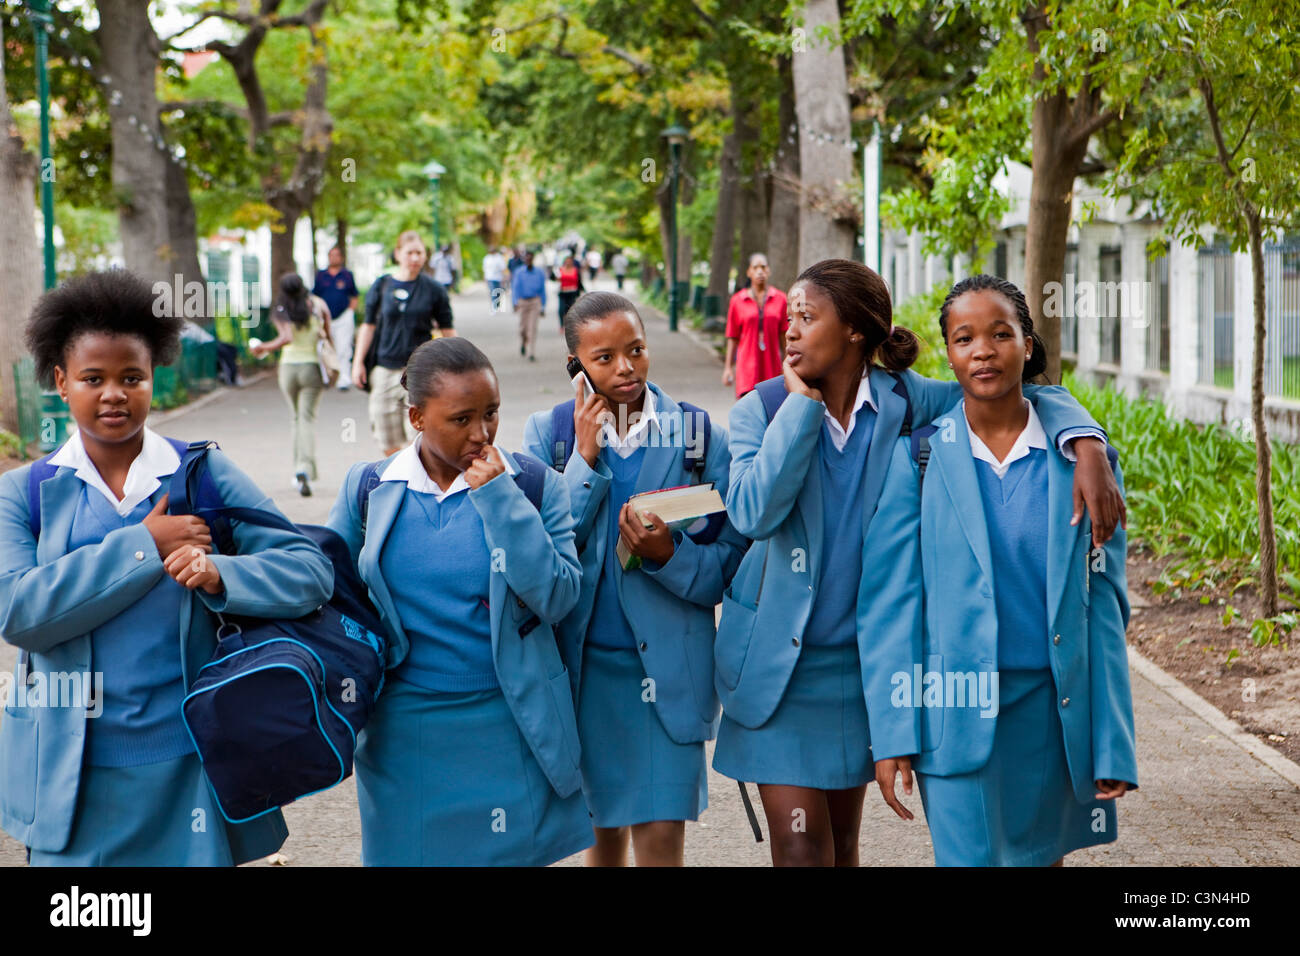 South Africa, Cape Town, School girls at the entrance of the Company Gardens. Stock Photo